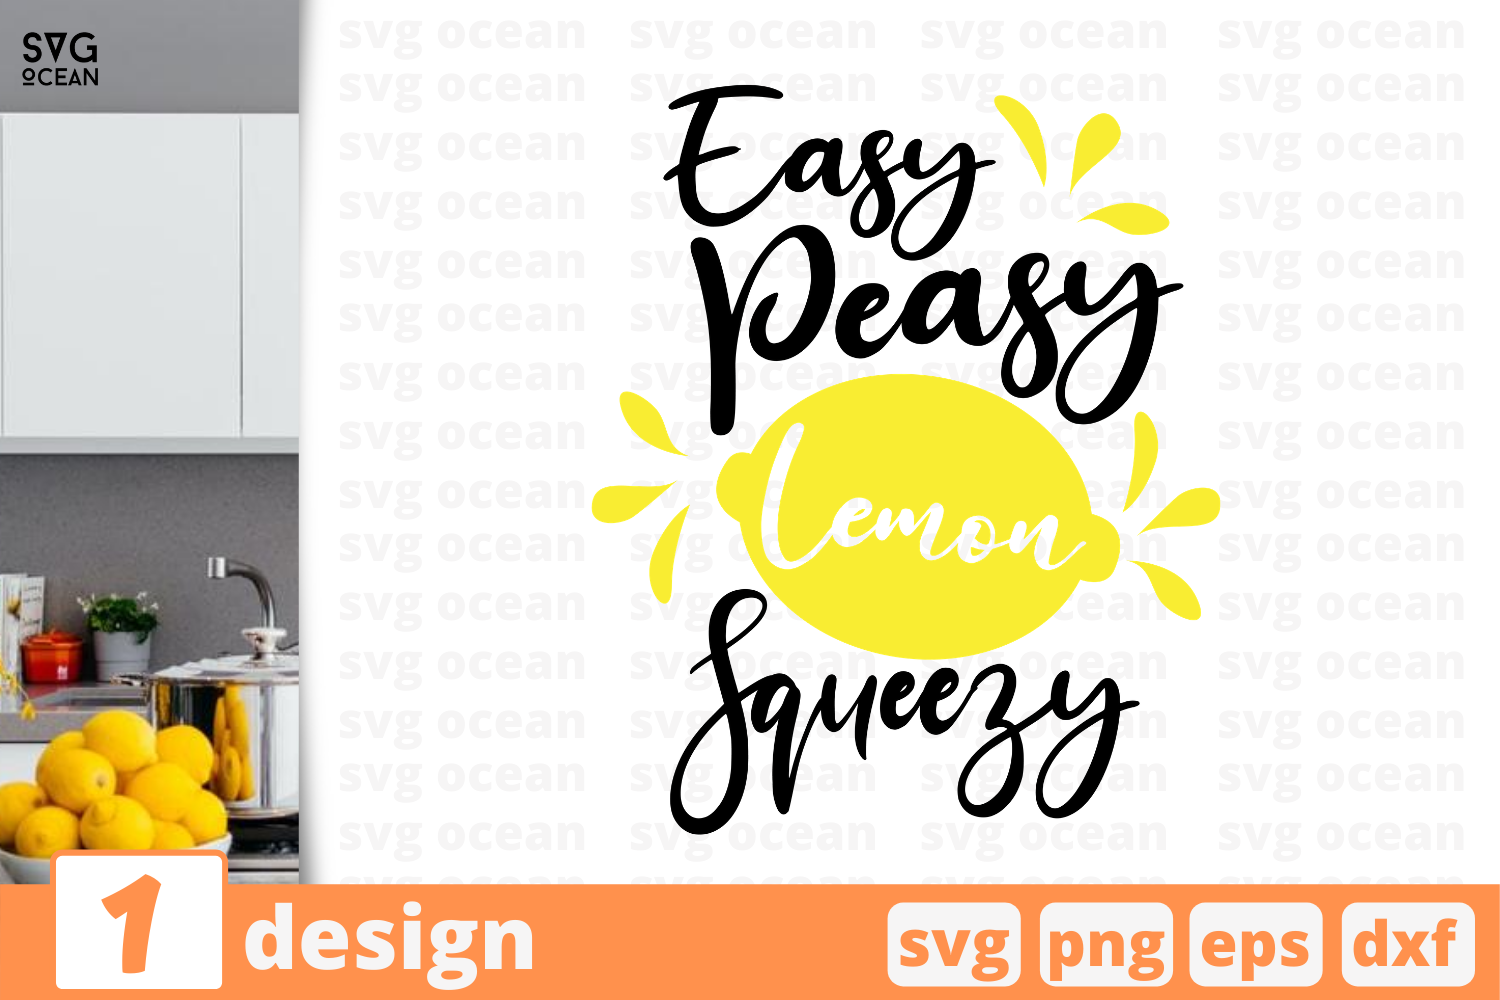 Download 1 Easy Peasy Lemon Squeezy Kitchen Quotes Cricut Svg By Svgocean Thehungryjpeg Com